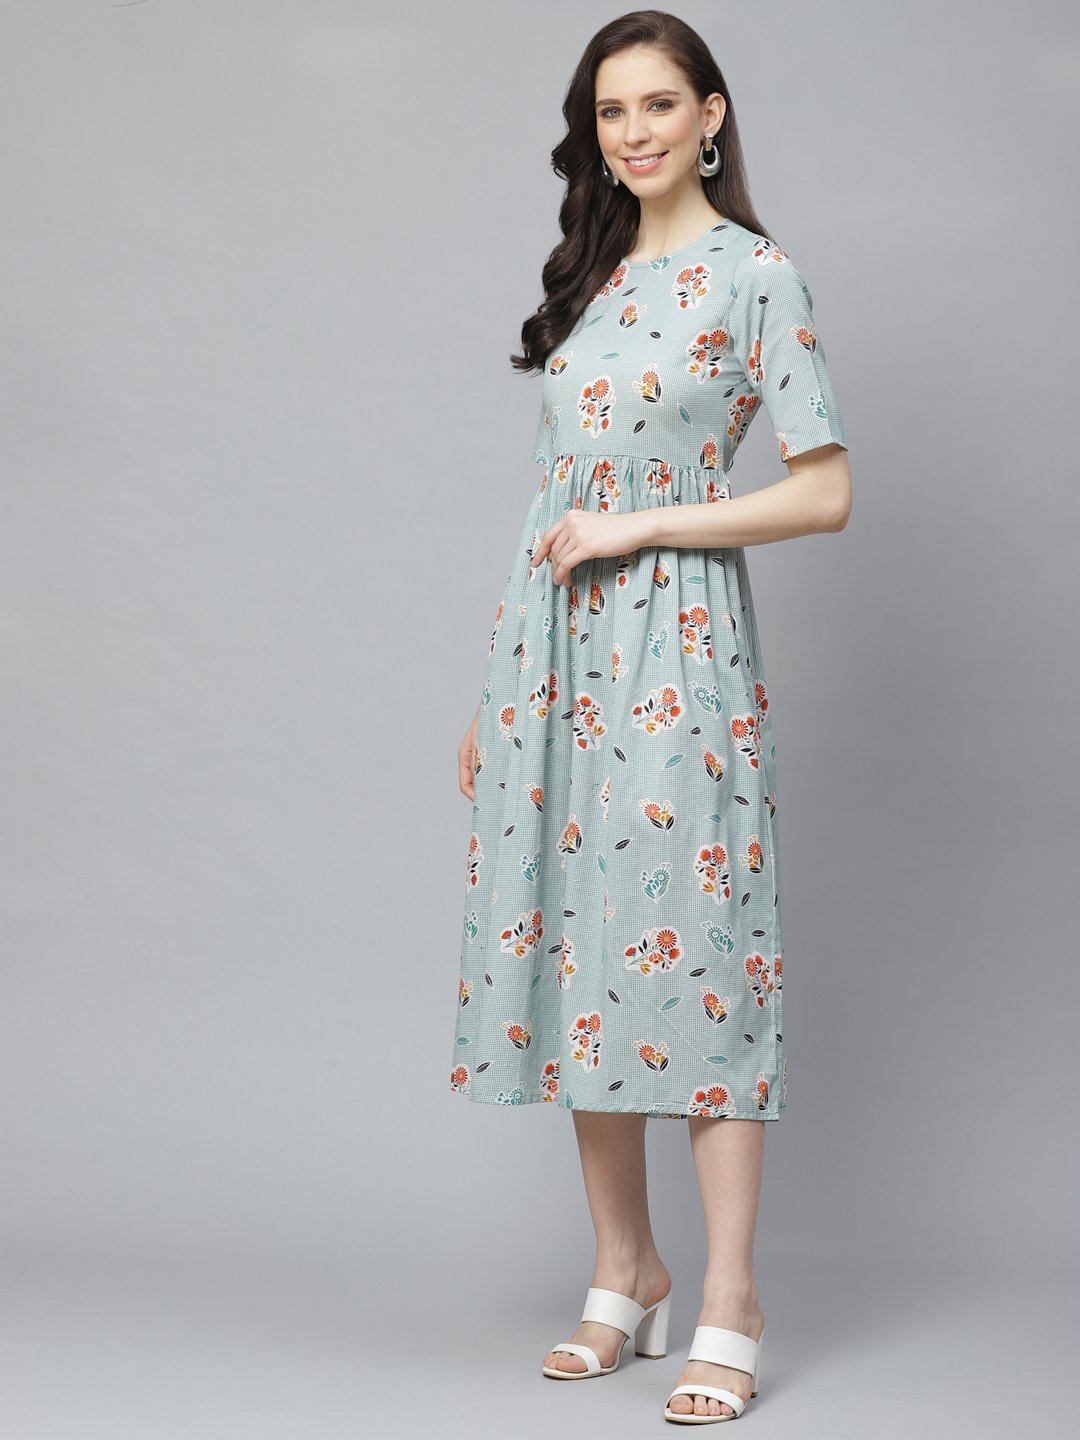 Women's Turquoise Blue Floral Printed Round Neck Cotton A-Line Dress - Nayo Clothing